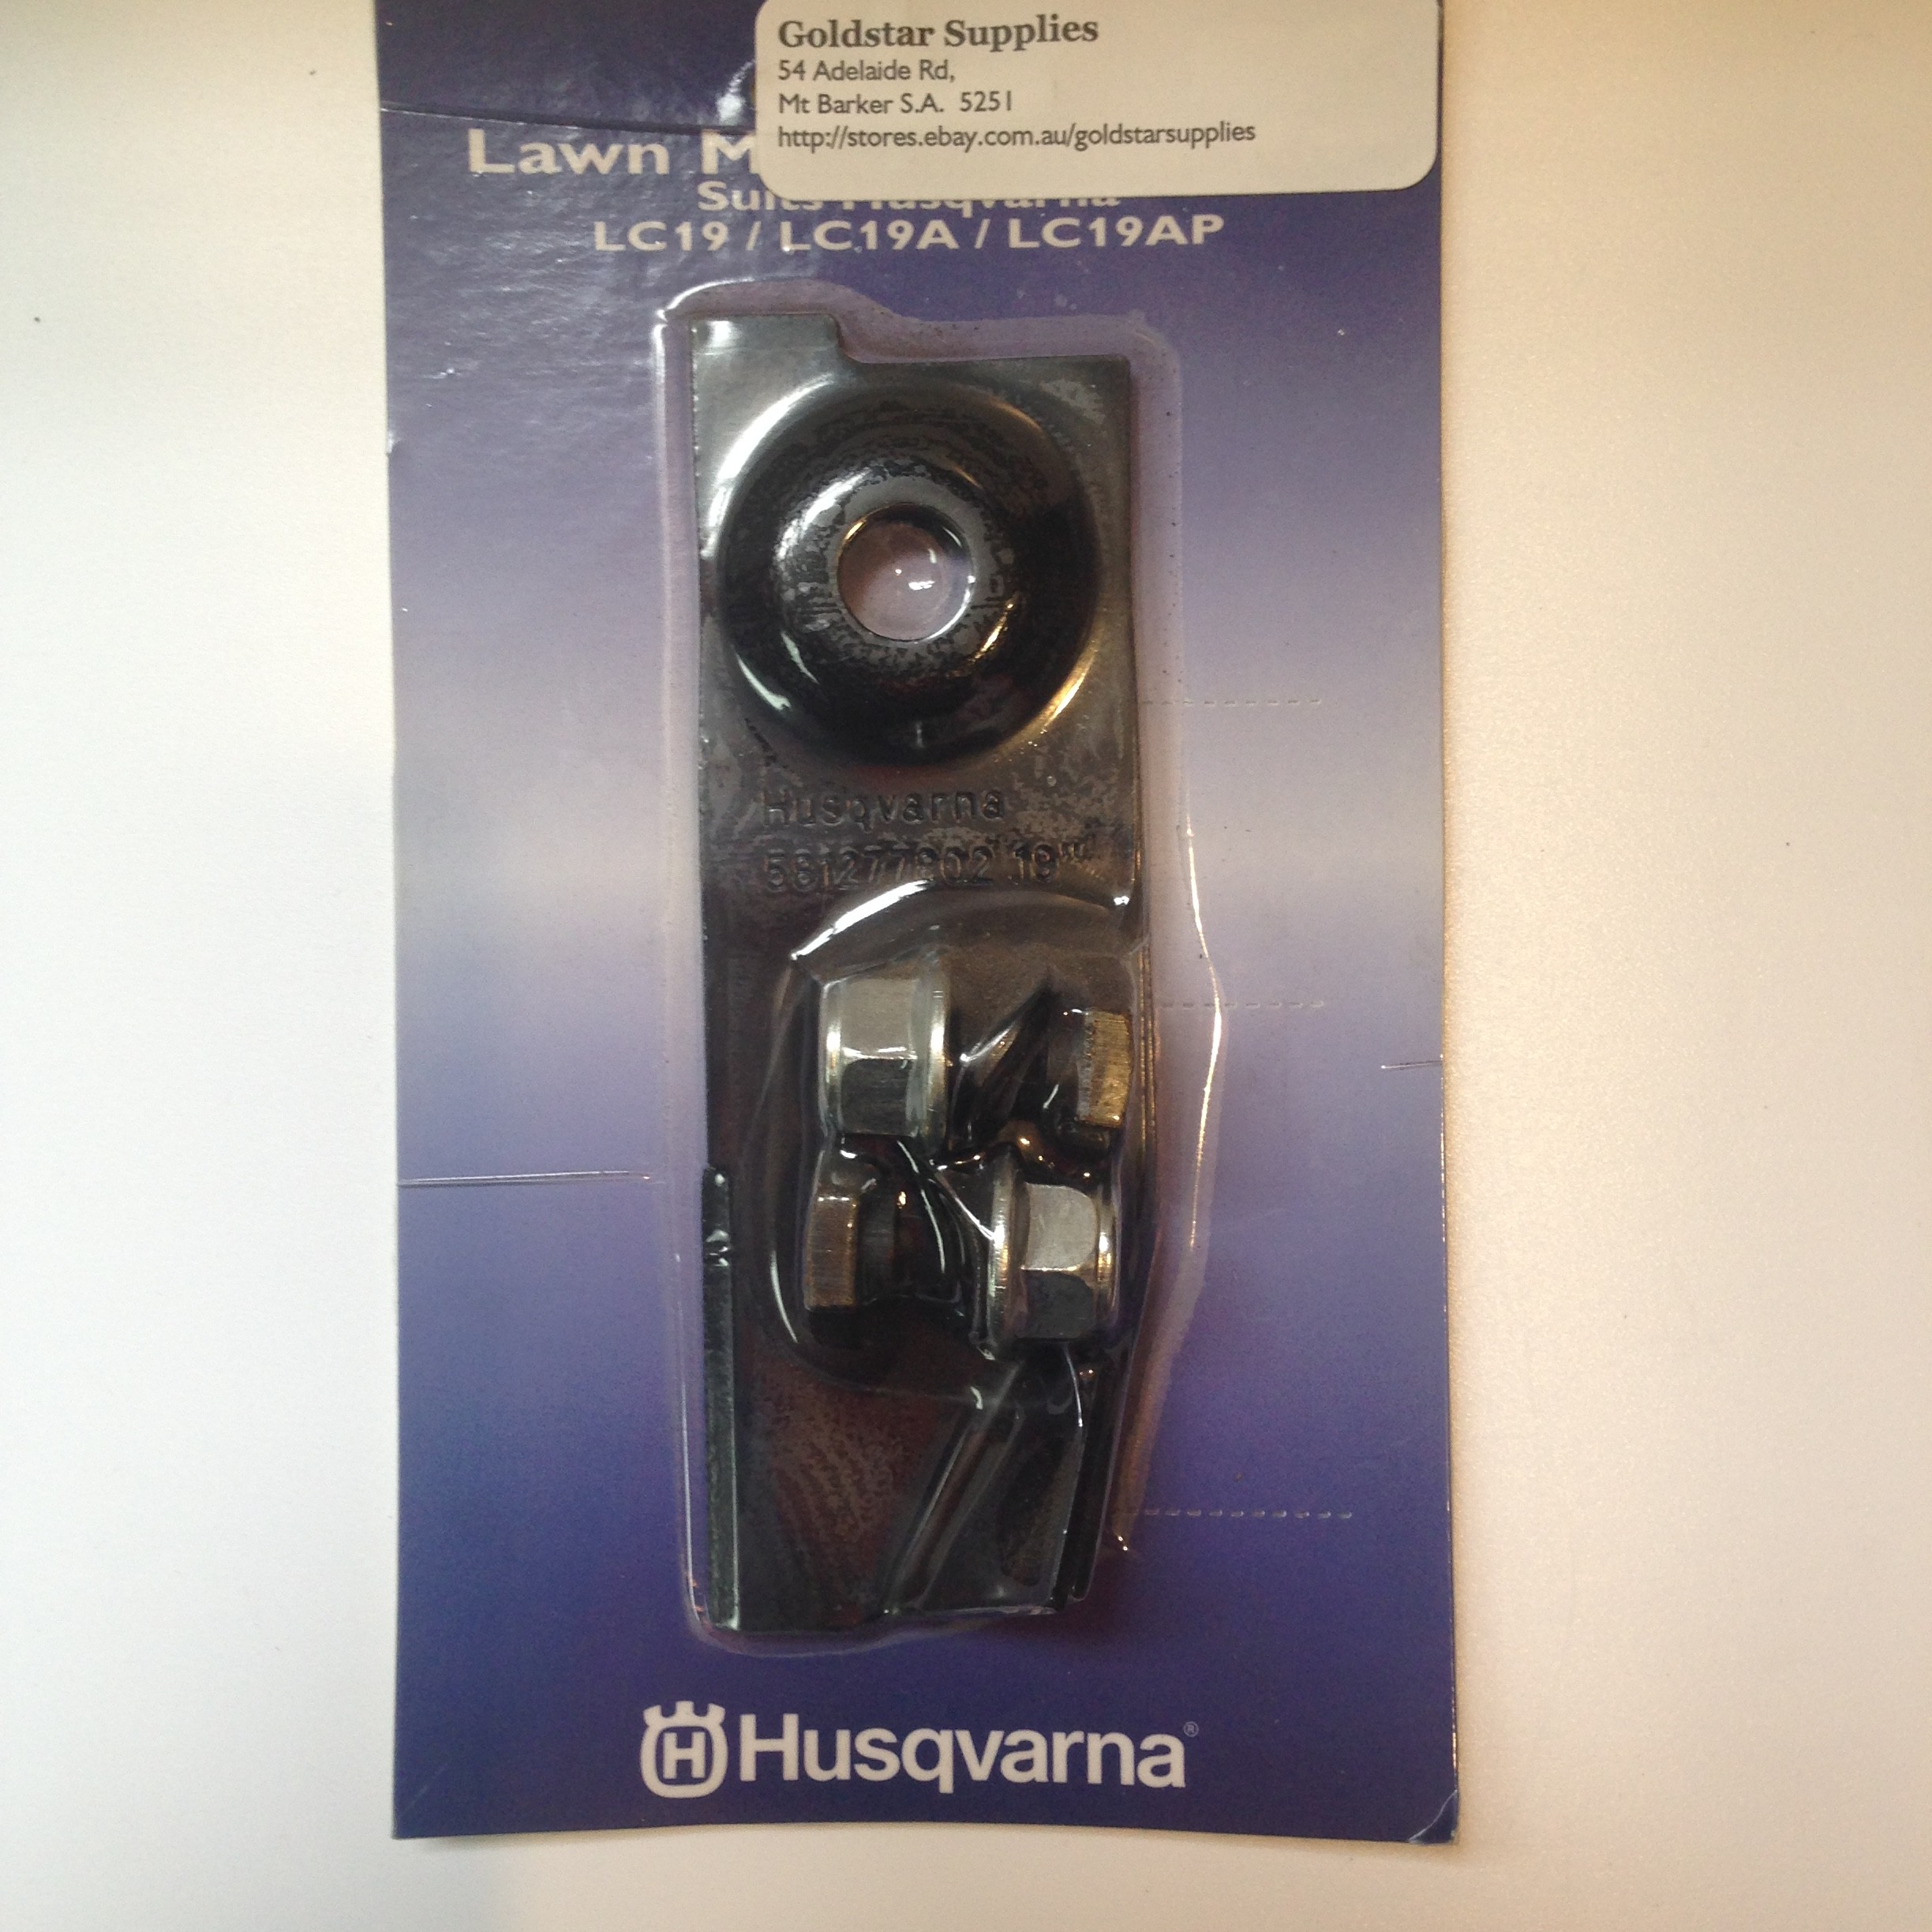 1 x pr of Husqvarna Lawnmower Blades & Bolts to suit LC18 (550EX engine)  LC19, LC19A, LC19AP & LC19SP Models